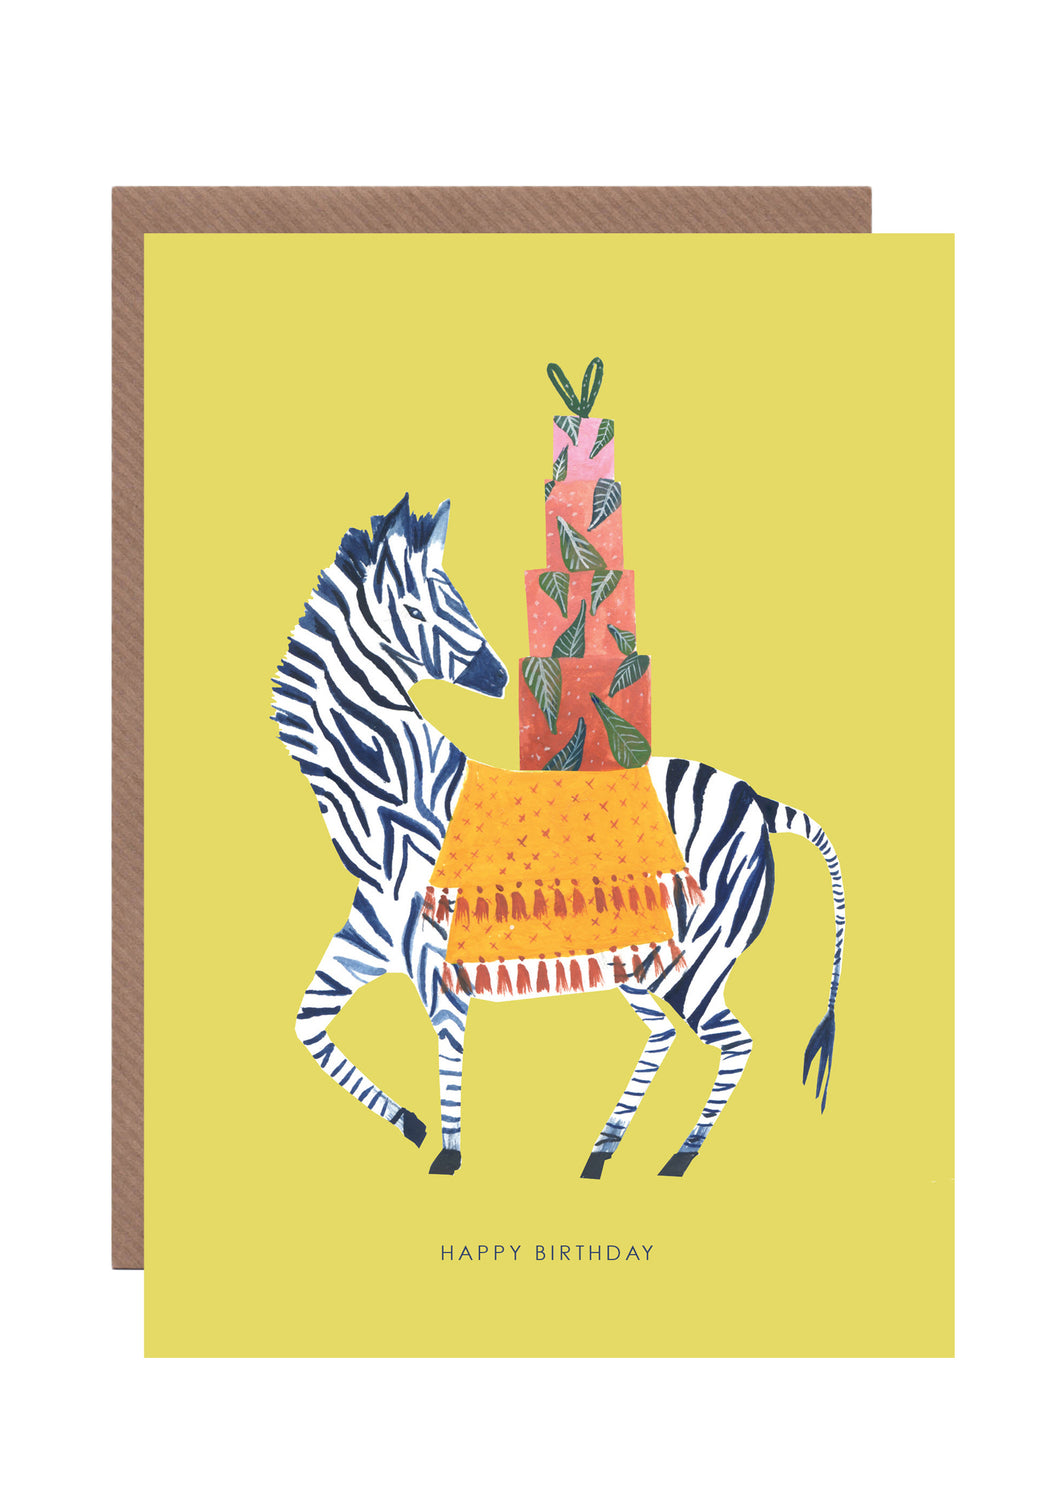 Zebra and Present Tower Birthday Greetings Card